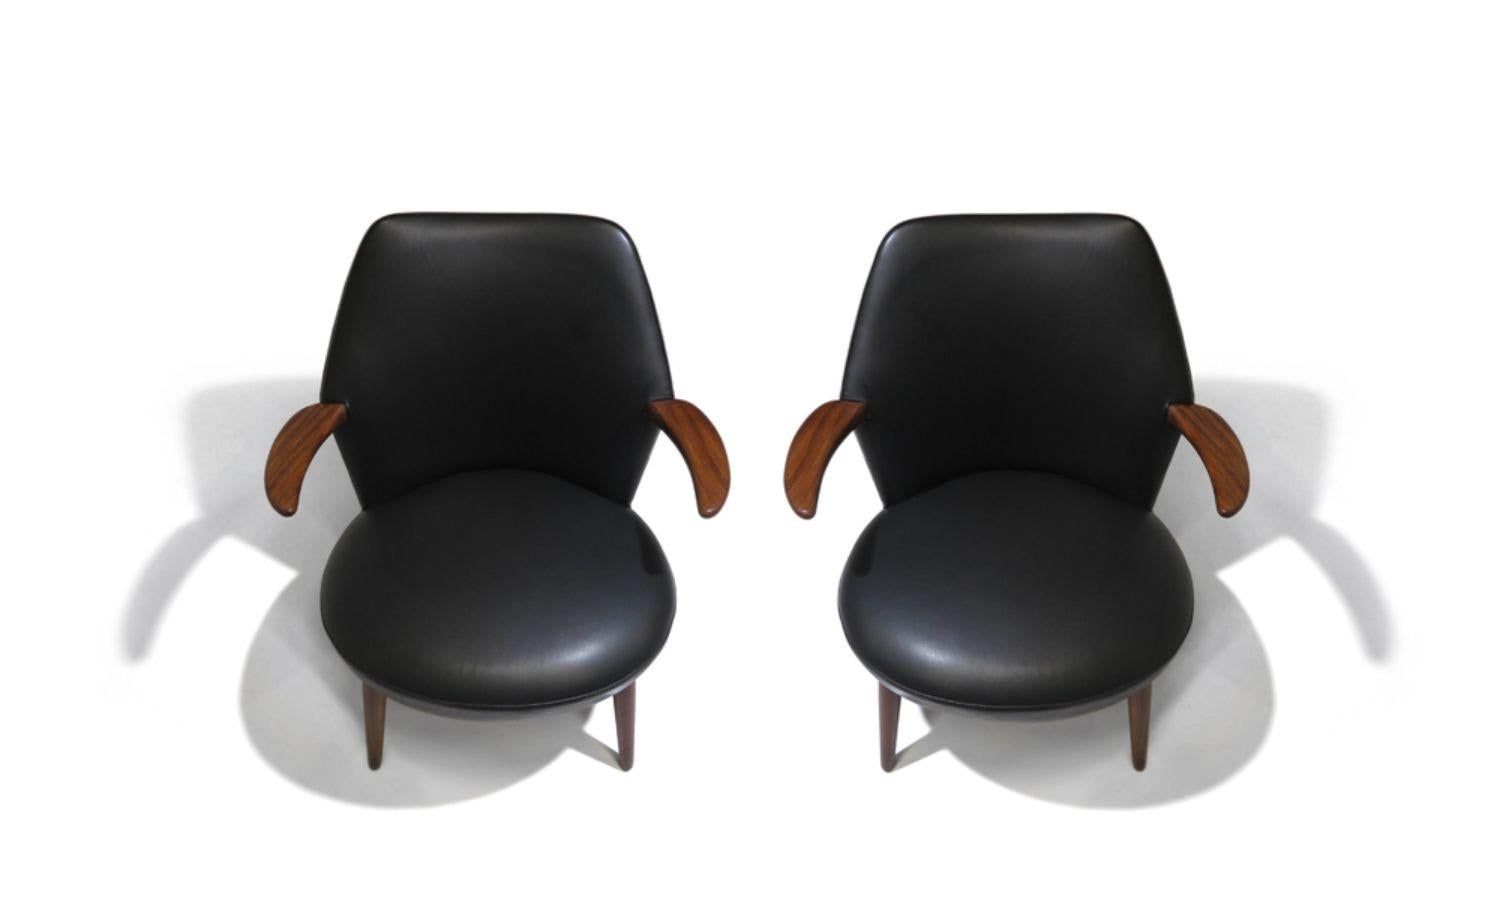 Mid-century danish lounge chairs with curved backs and horn-shaped arms raised on tapered teak legs, newly upholstered in black leather. Chairs are in excellent condition with minor signs of age and use.
Measurements
W 29.13’’ x D 29.25’’ x